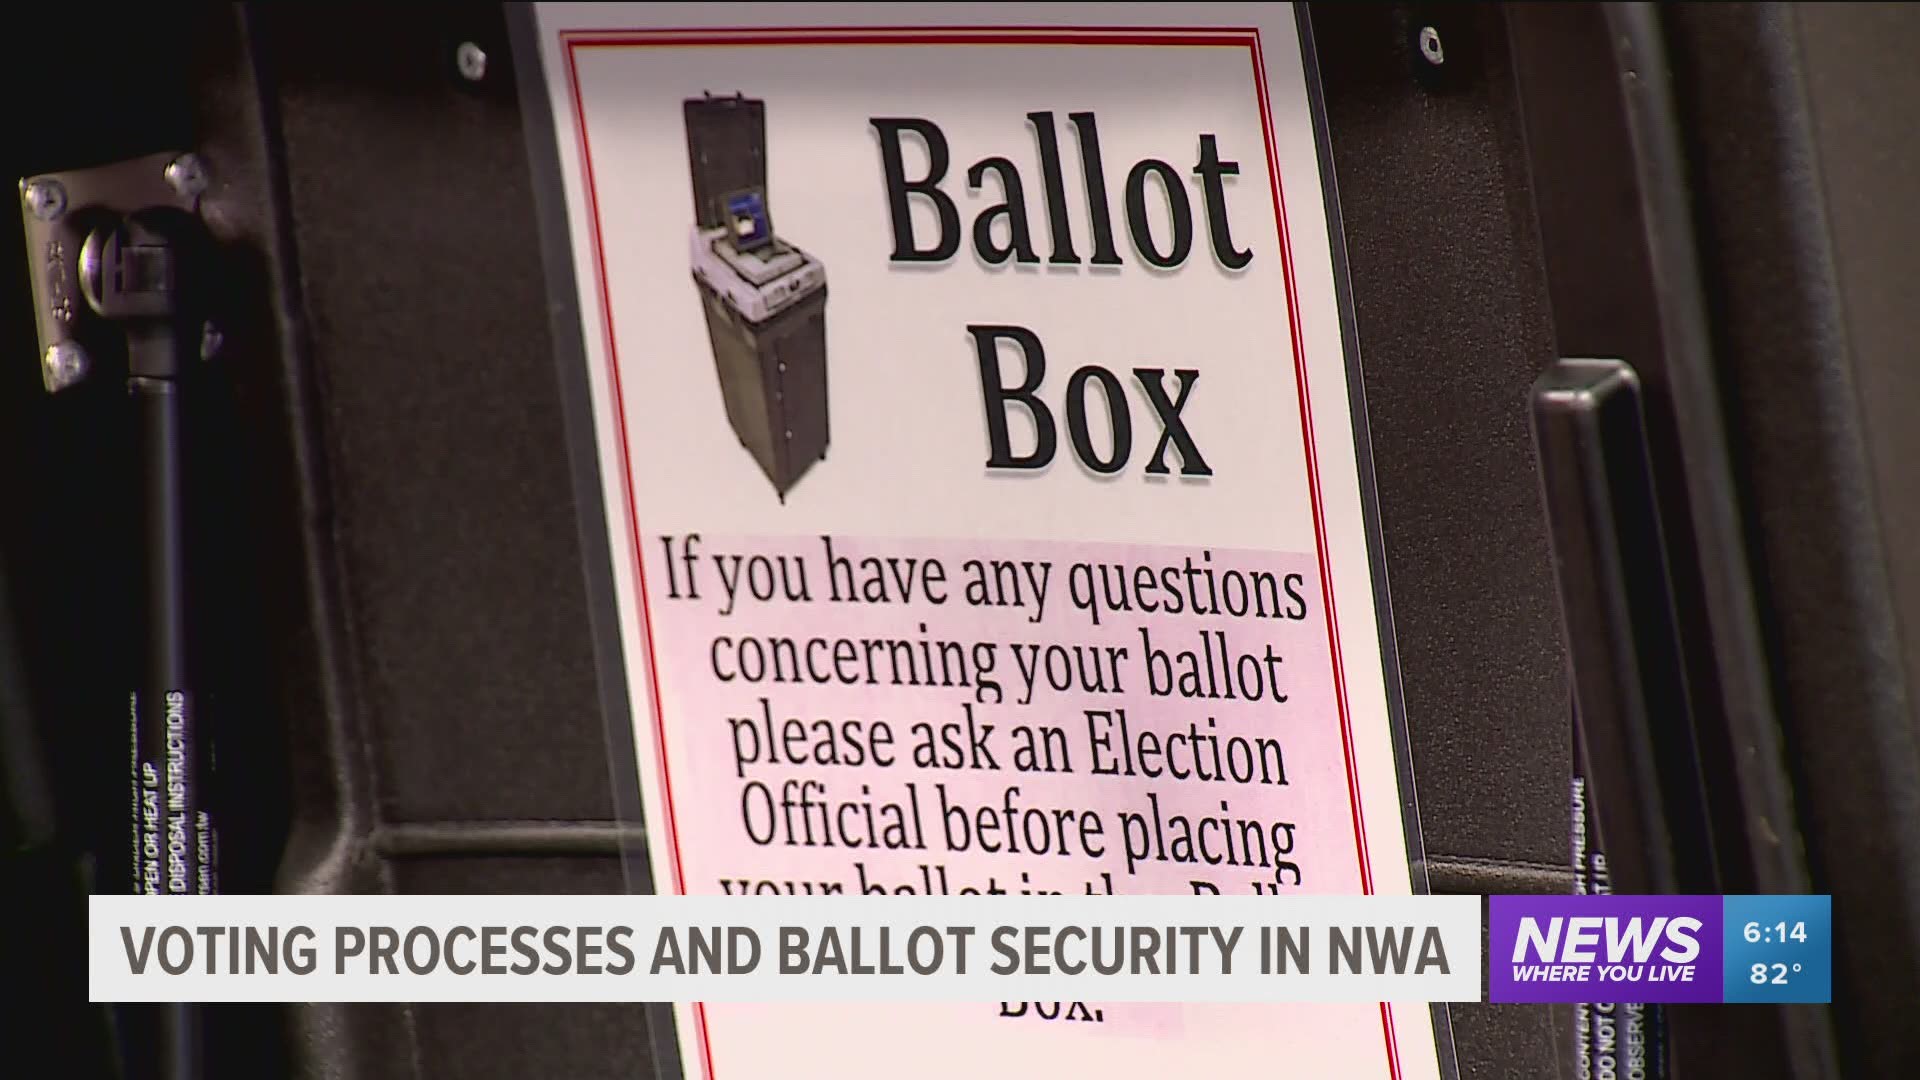 Local election officials explain how ballots are collected, counted, and recorded during the general election.